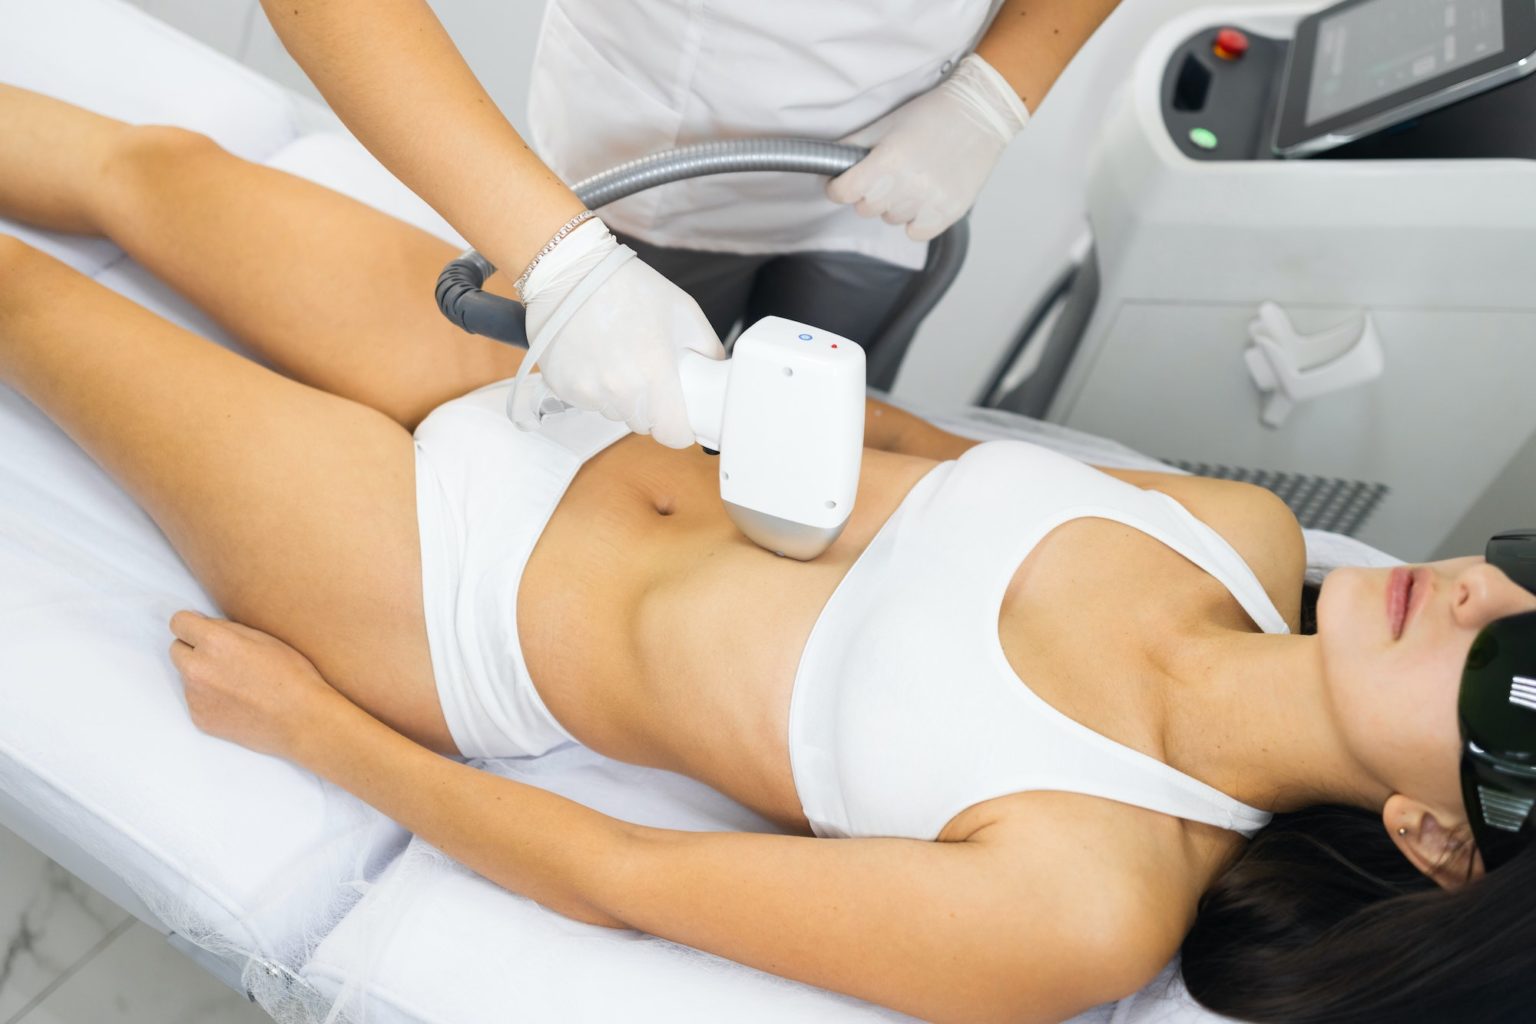 Woman on laser hair removal procedure